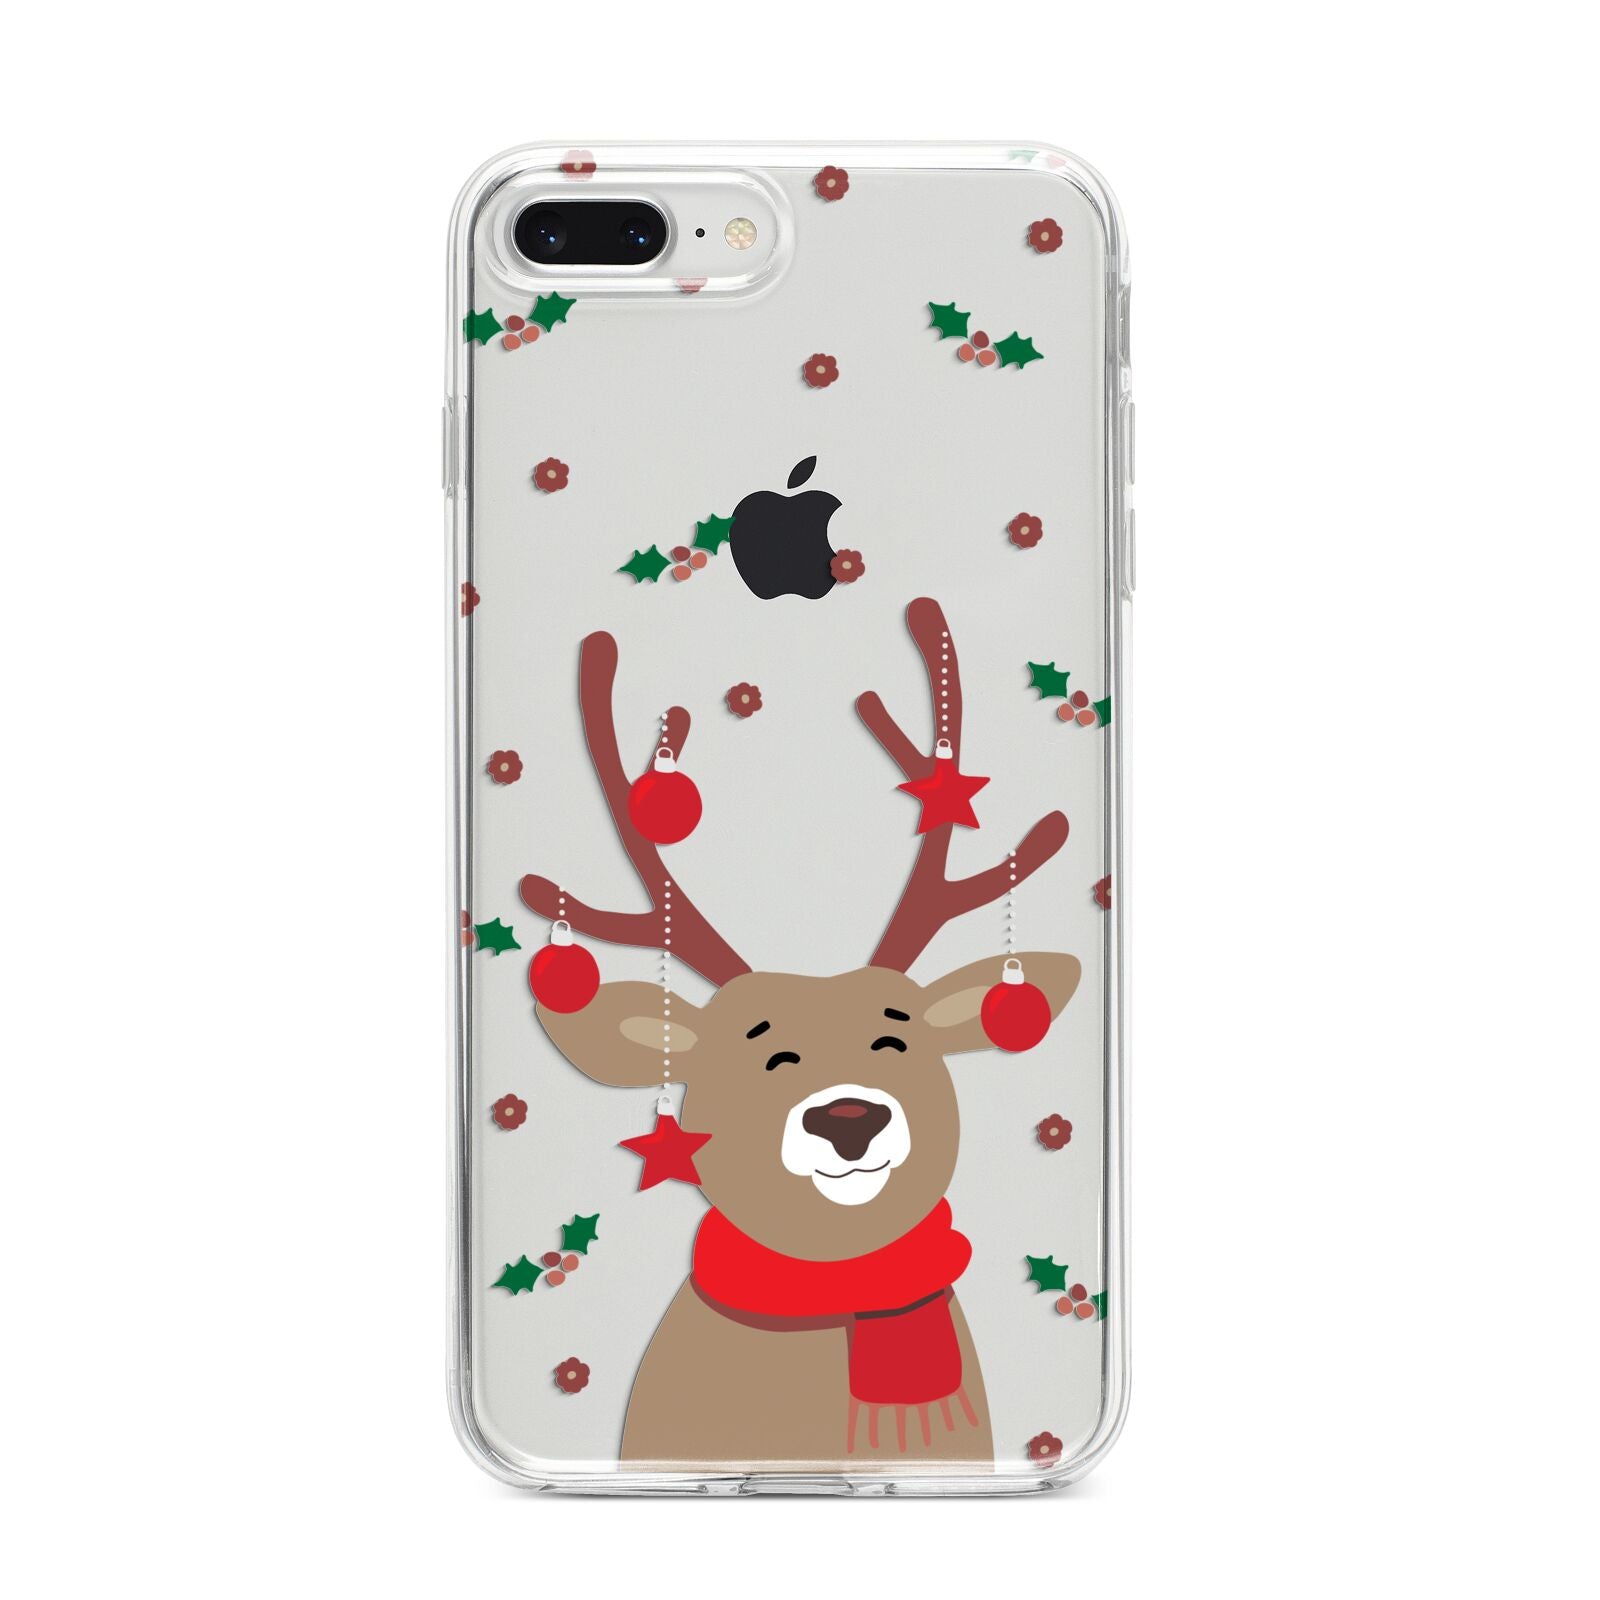 Reindeer Christmas iPhone 8 Plus Bumper Case on Silver iPhone